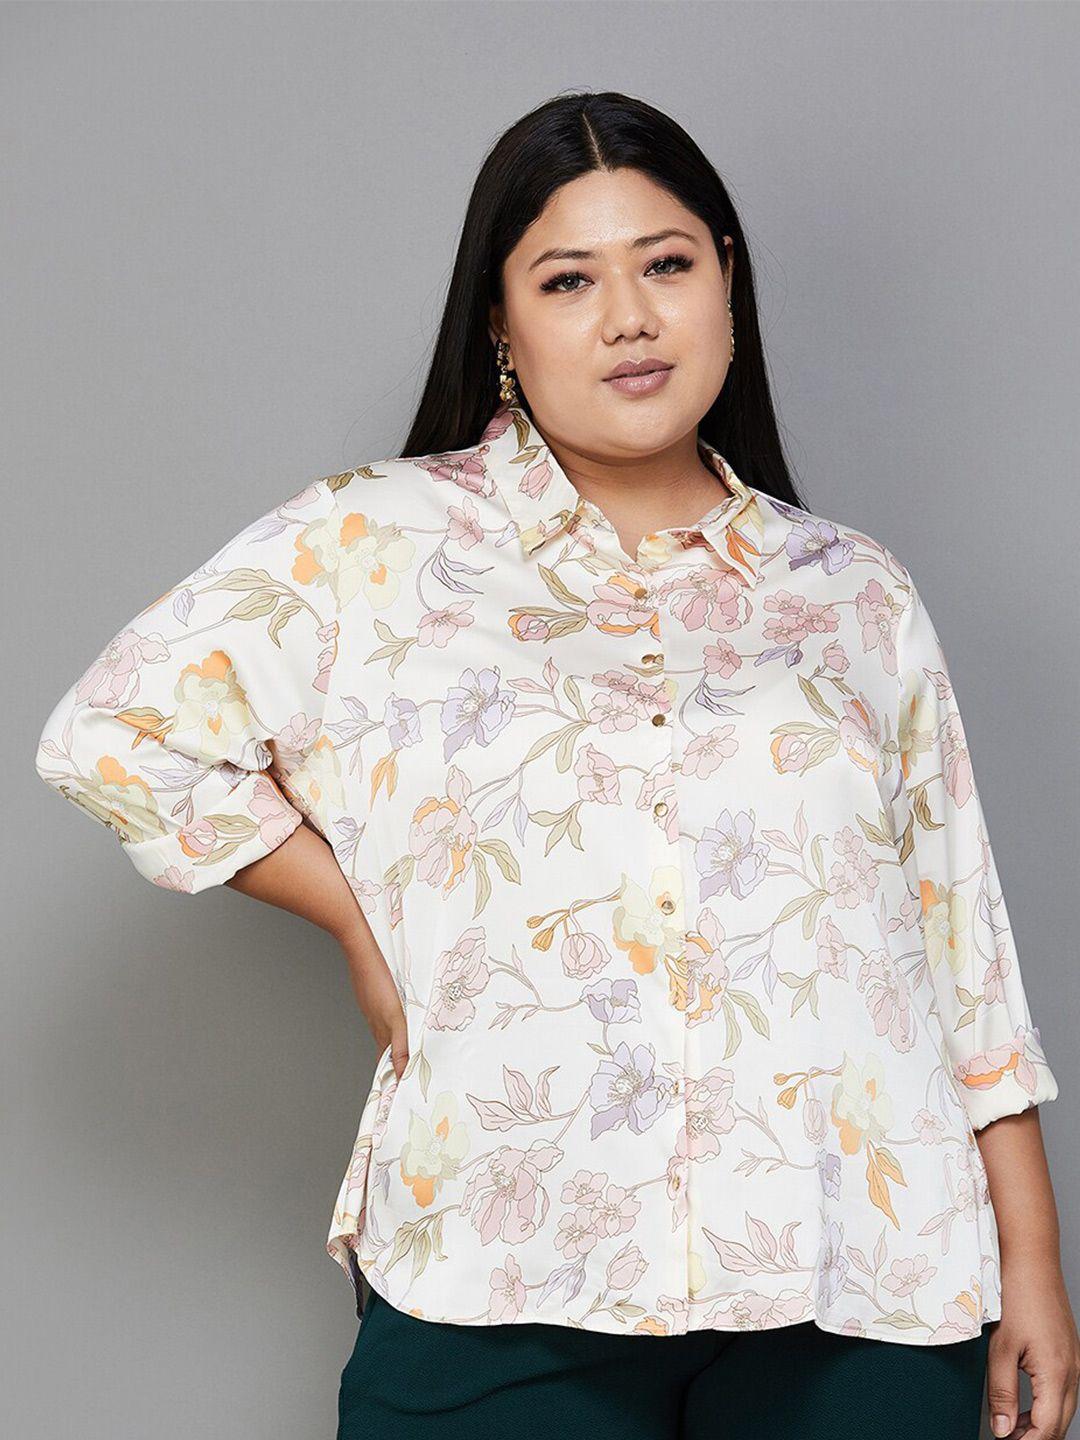 nexus-by-lifestyle-plus-size-floral-printed-spread-collar-shirt